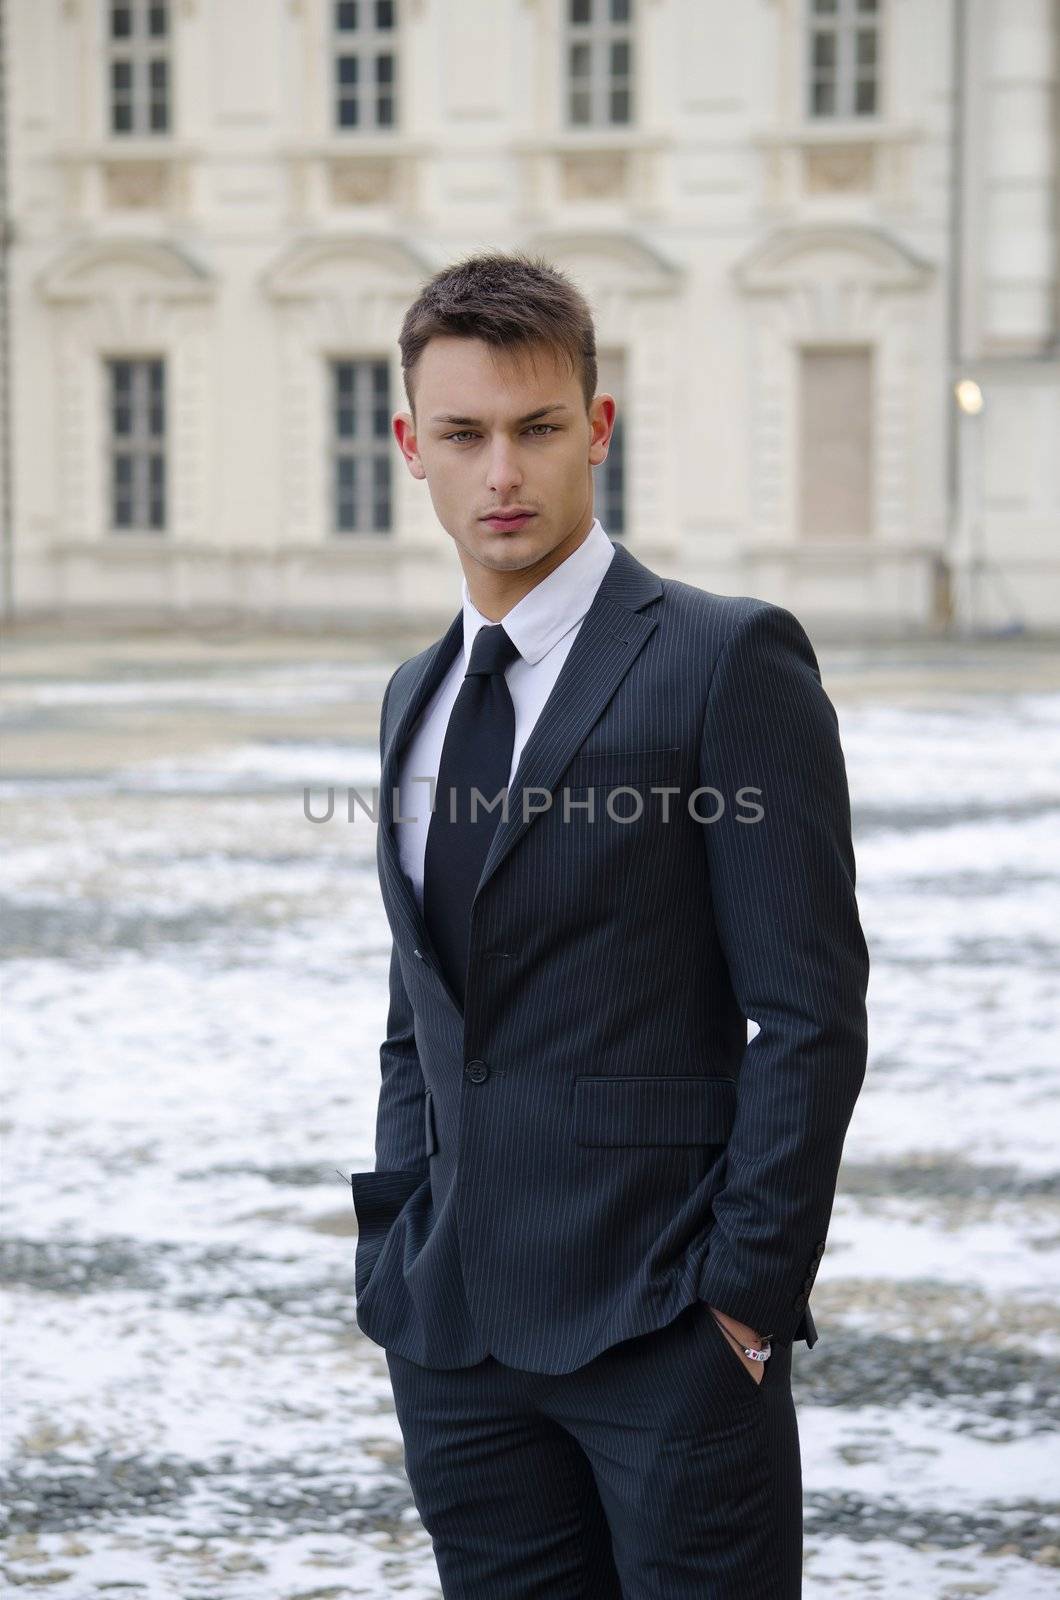 Good looking young man and elegant palace with snow by artofphoto